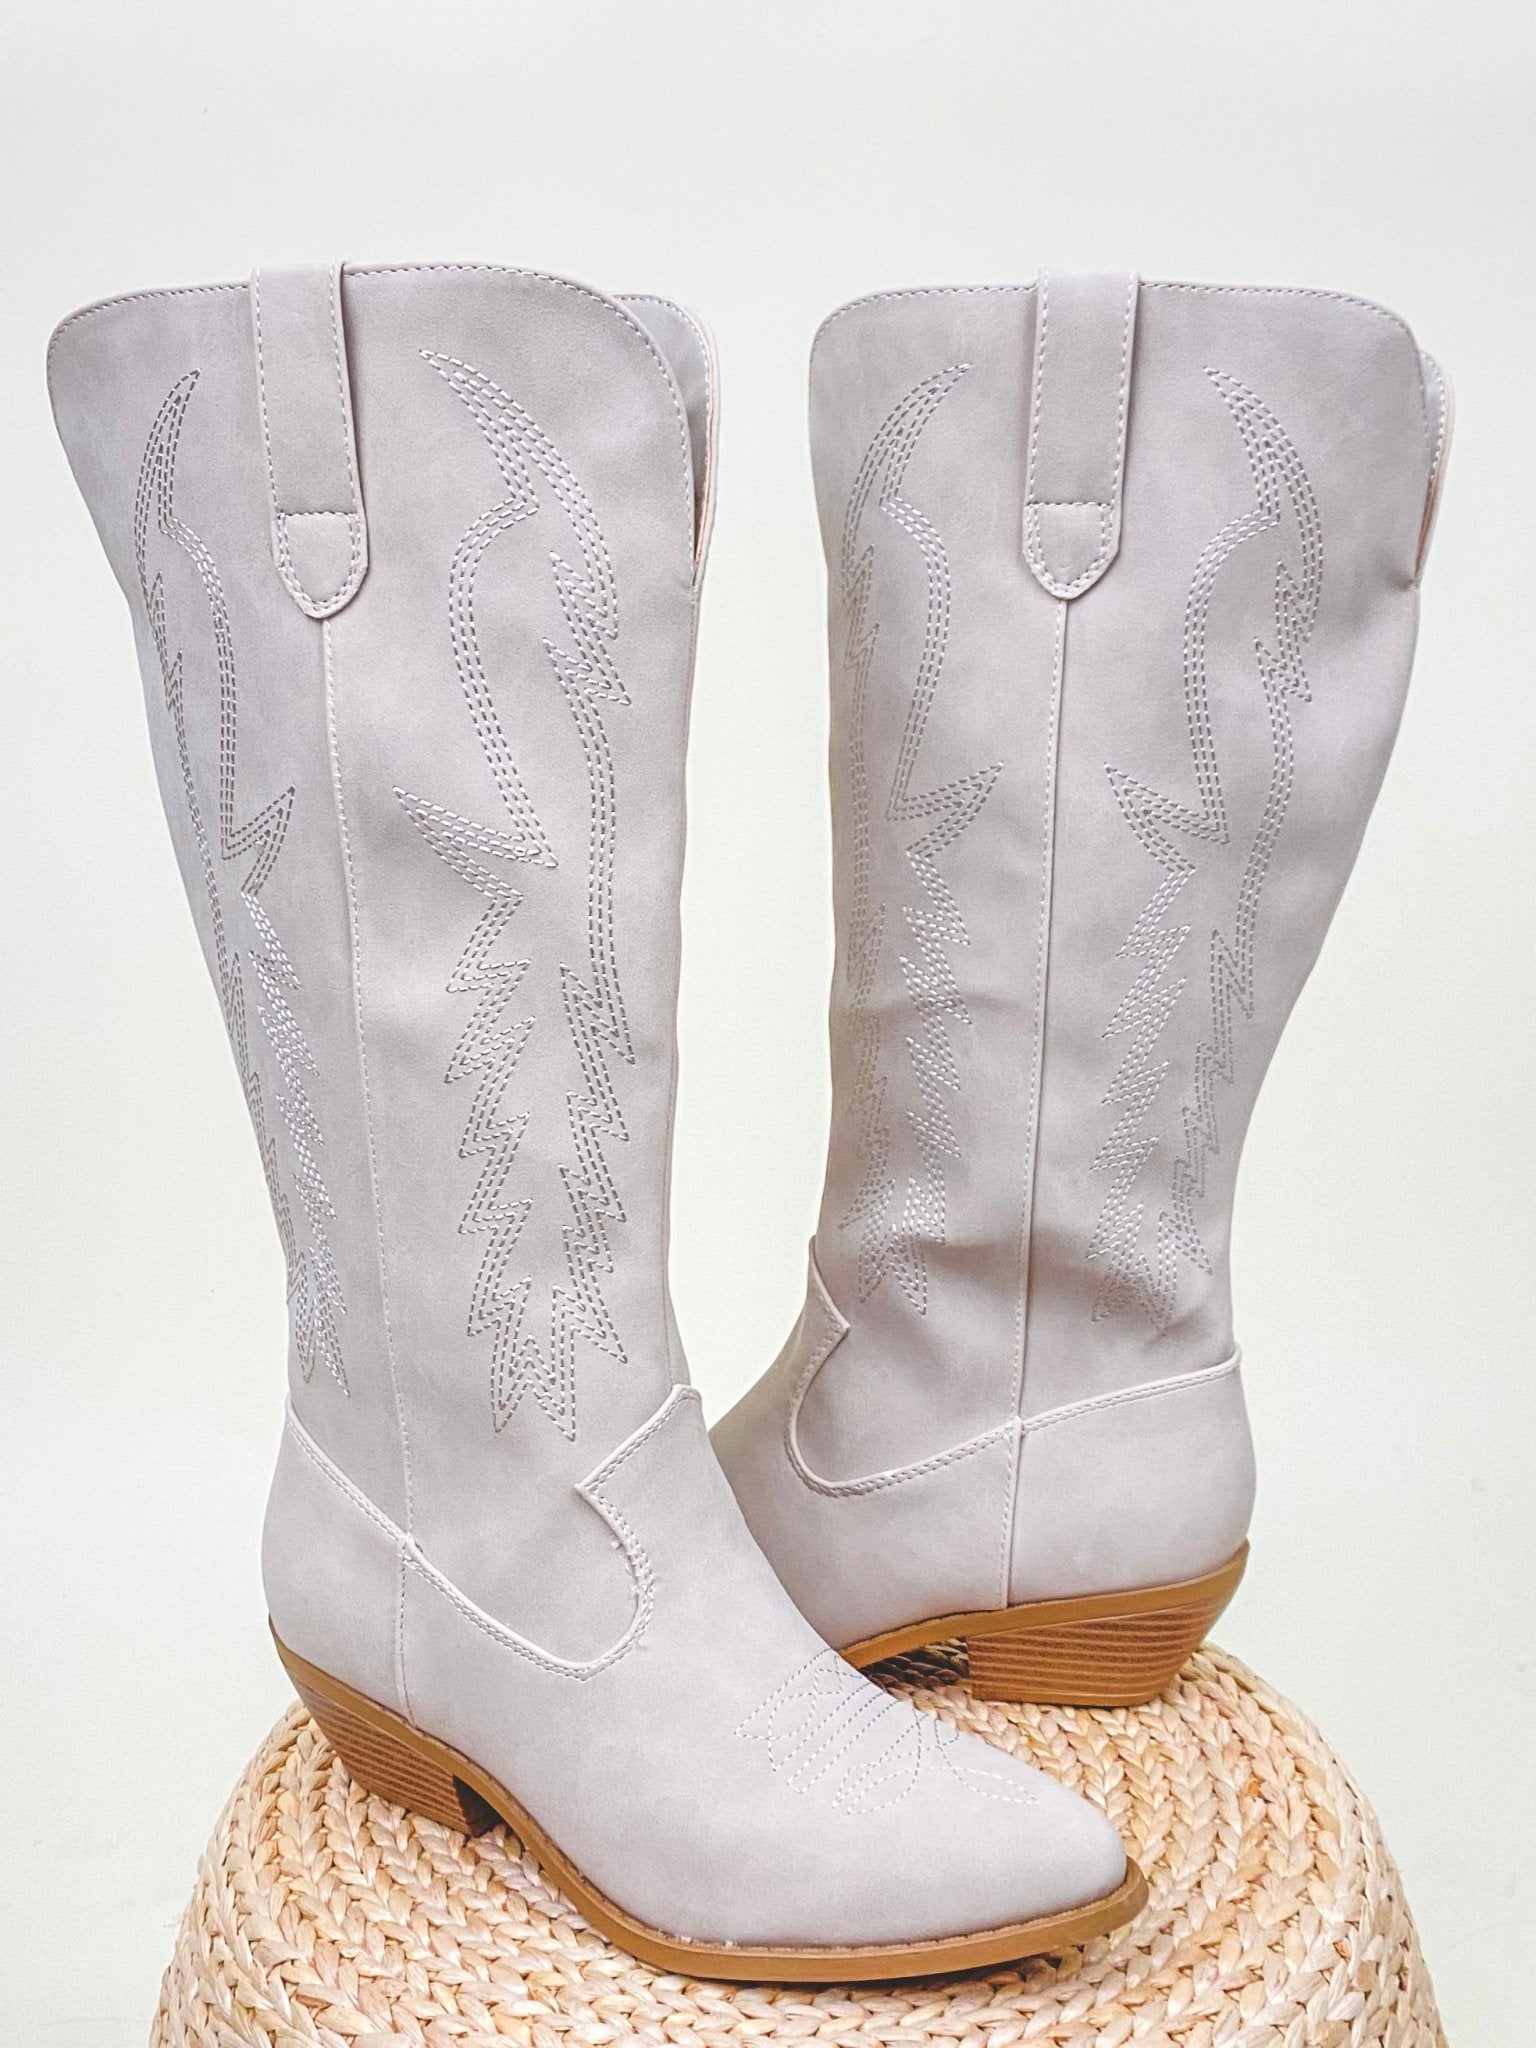 Suede cowboy boots sand - Cute Shoes - Trendy Shoes at Lush Fashion Lounge Boutique in Oklahoma City